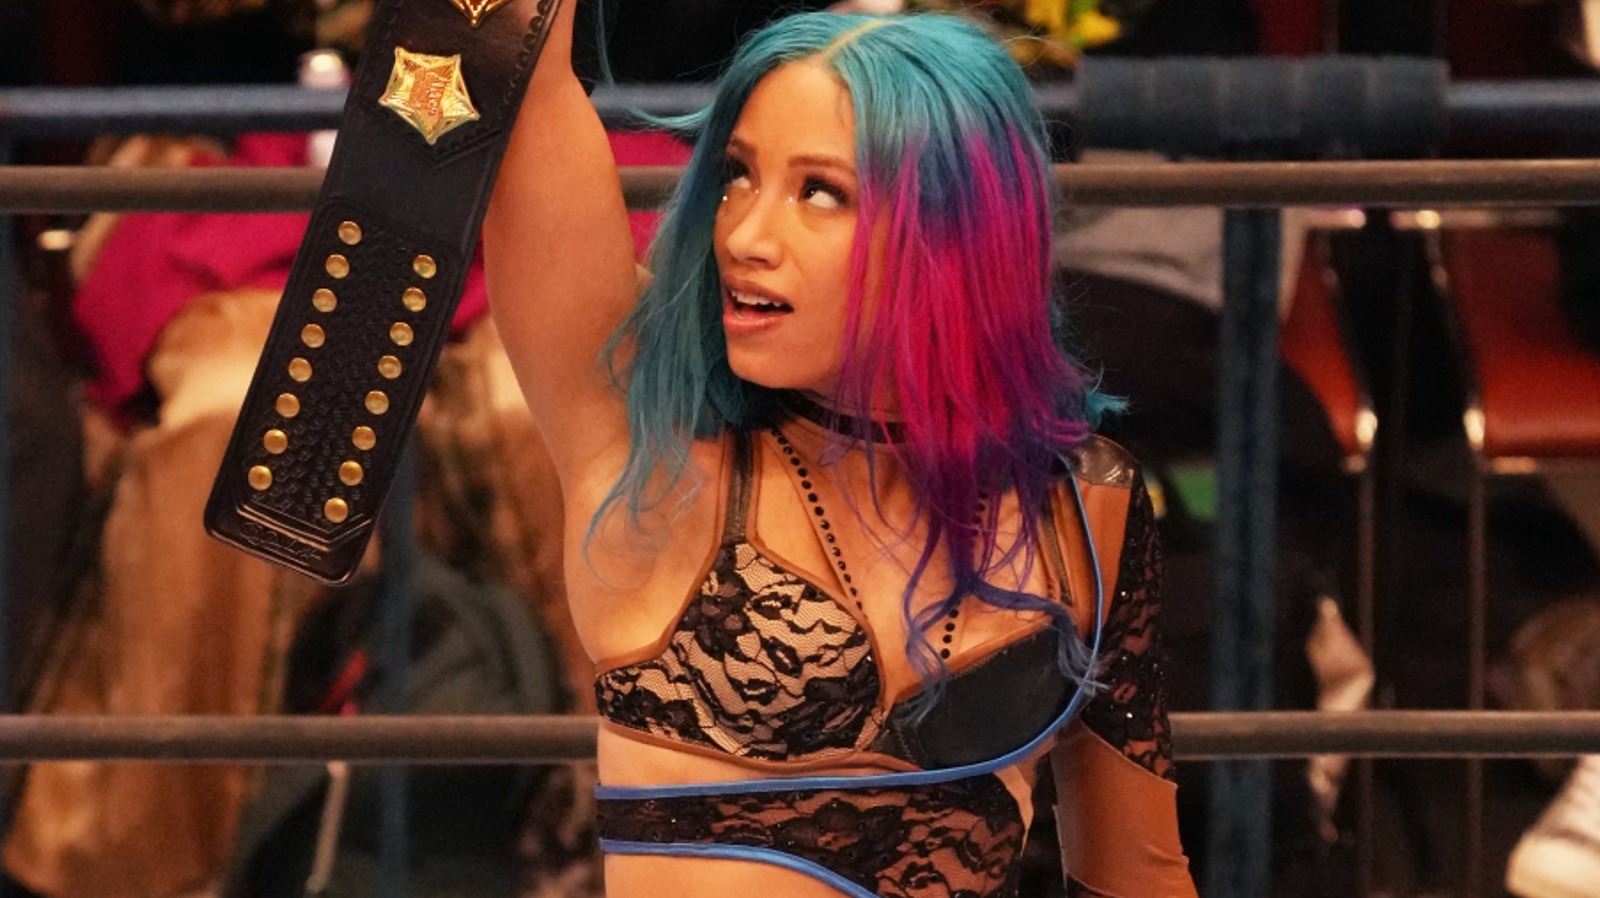 Mercedes Moné not done with NJPW/STARDOM, says her next stop is Resurgence  on 5/21